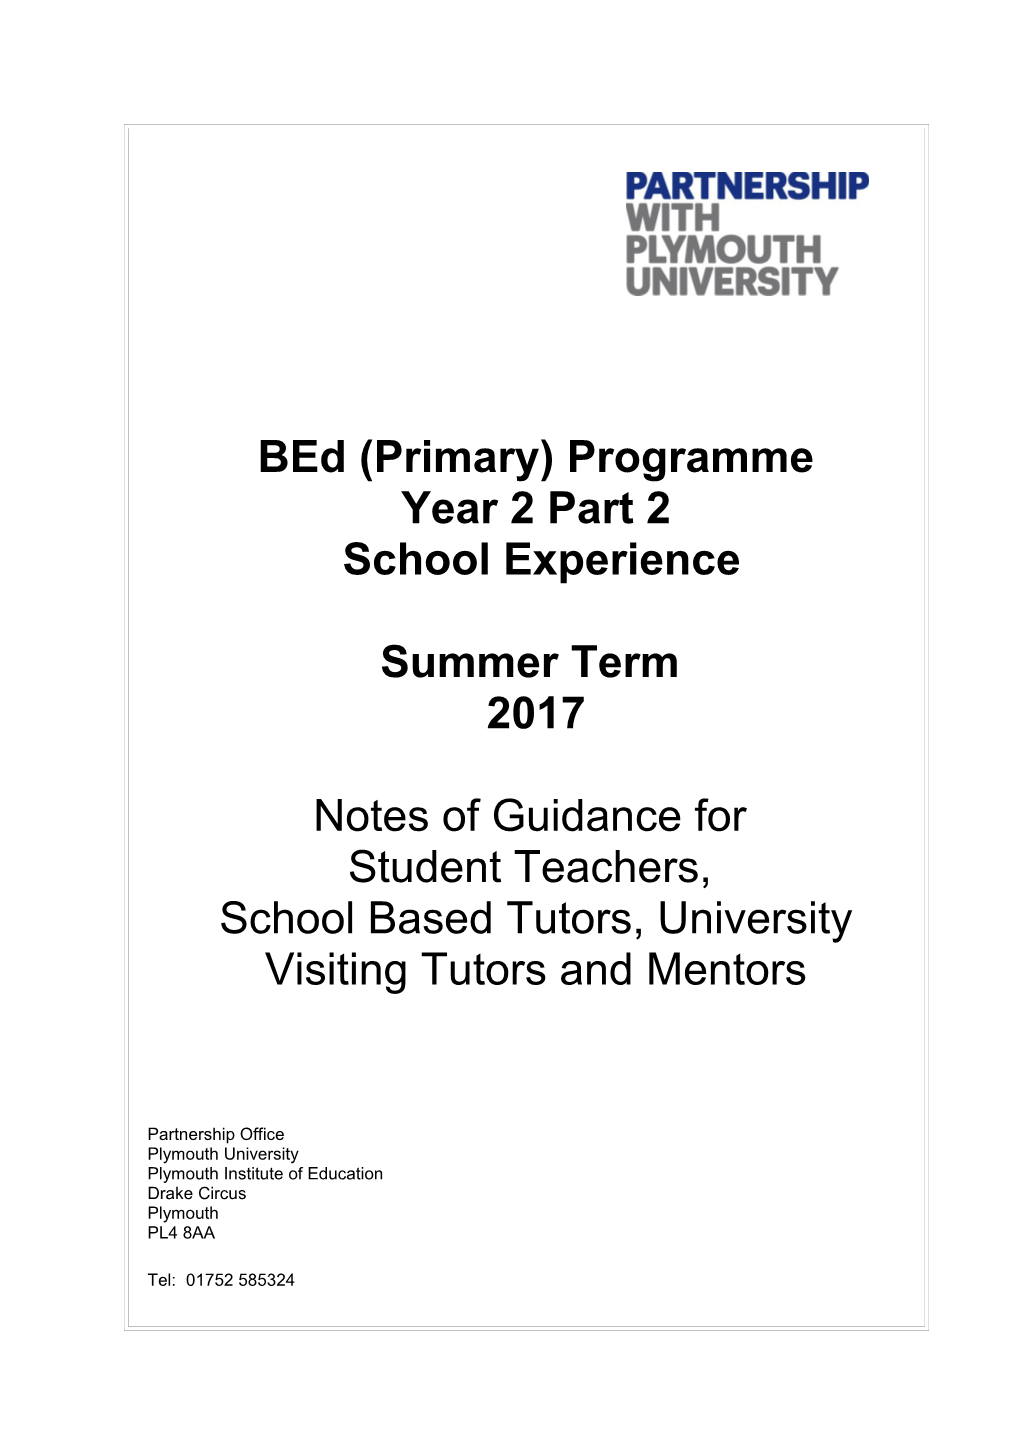 Bed (Primary) Programme s1